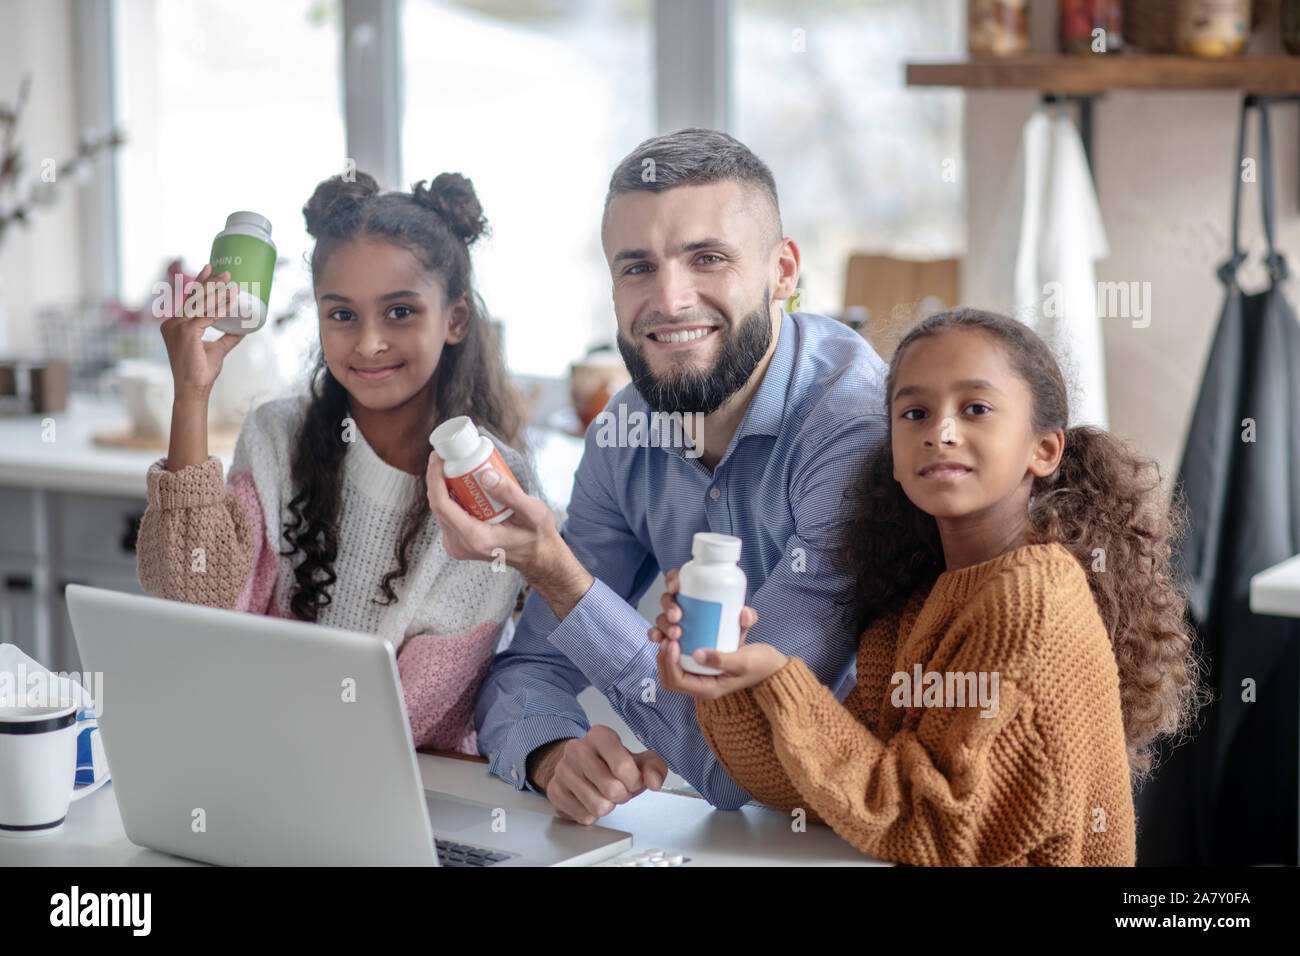 Father and girls holding vitamins while leading healthy lifestyle Stock Photo